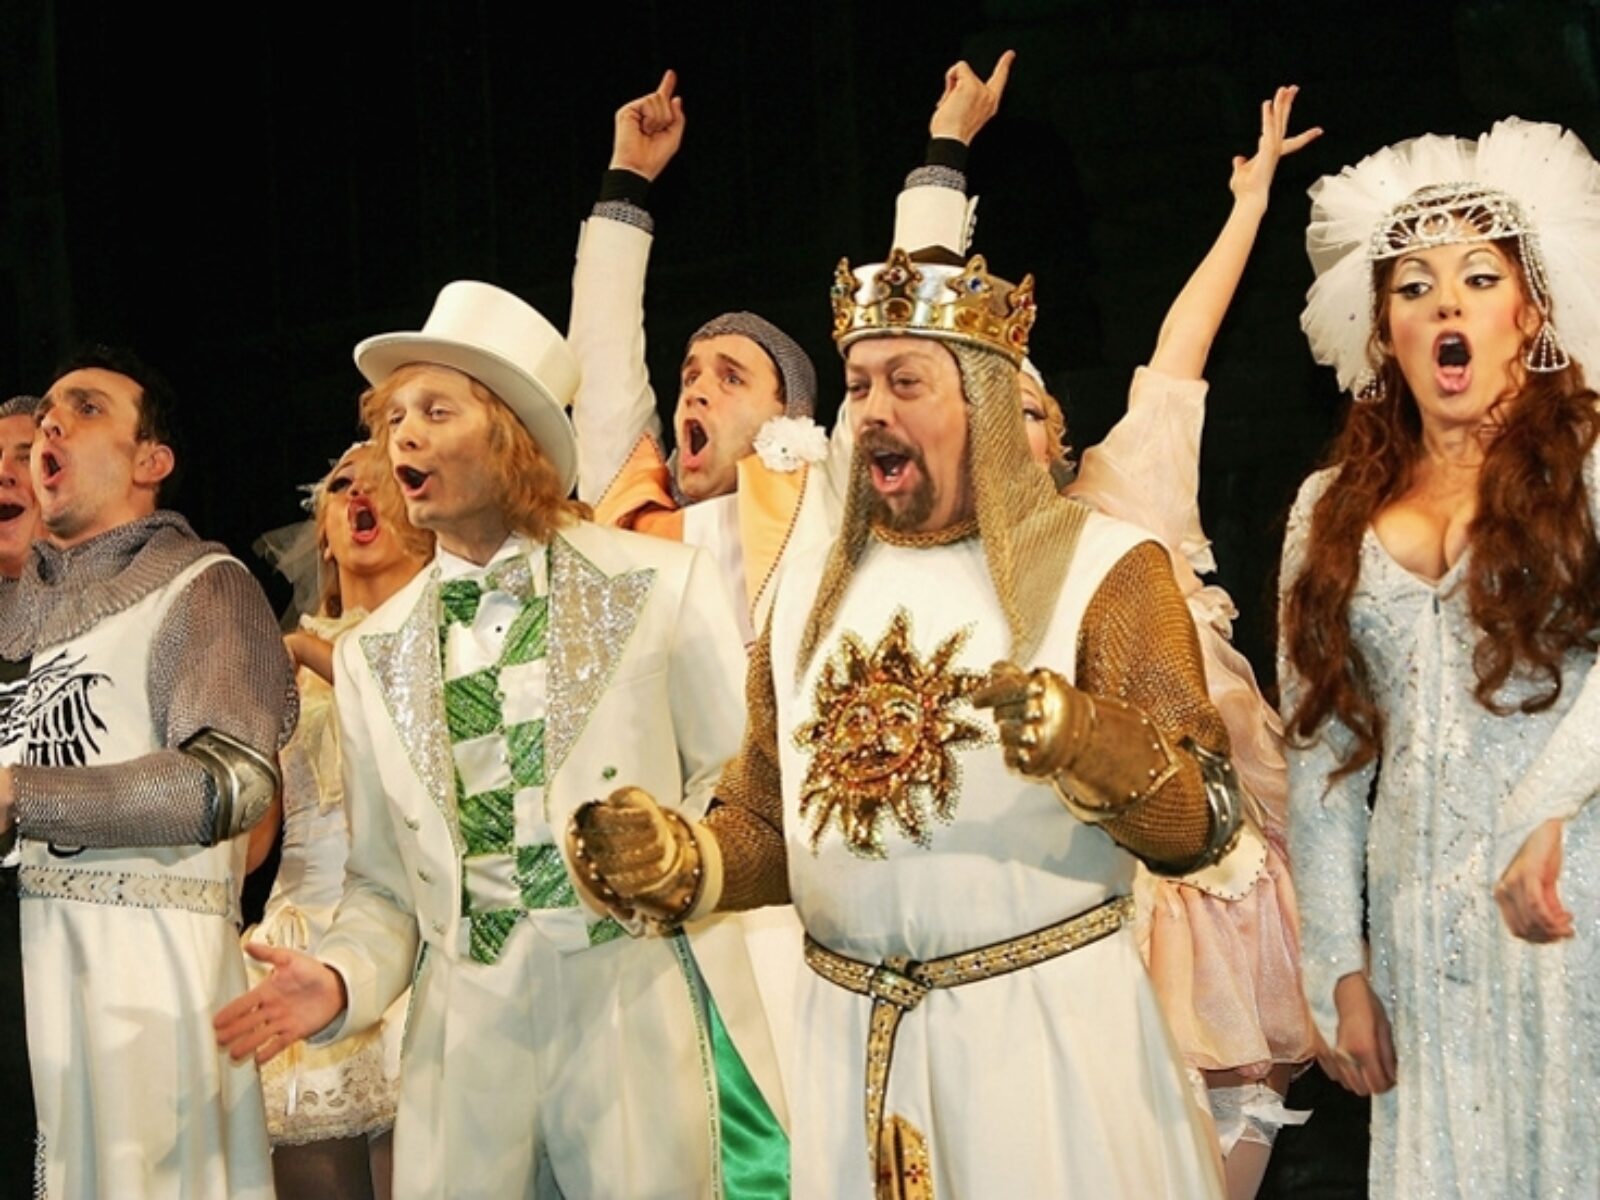 Spamalot Discount Broadway Tickets Including Discount Code and Ticket